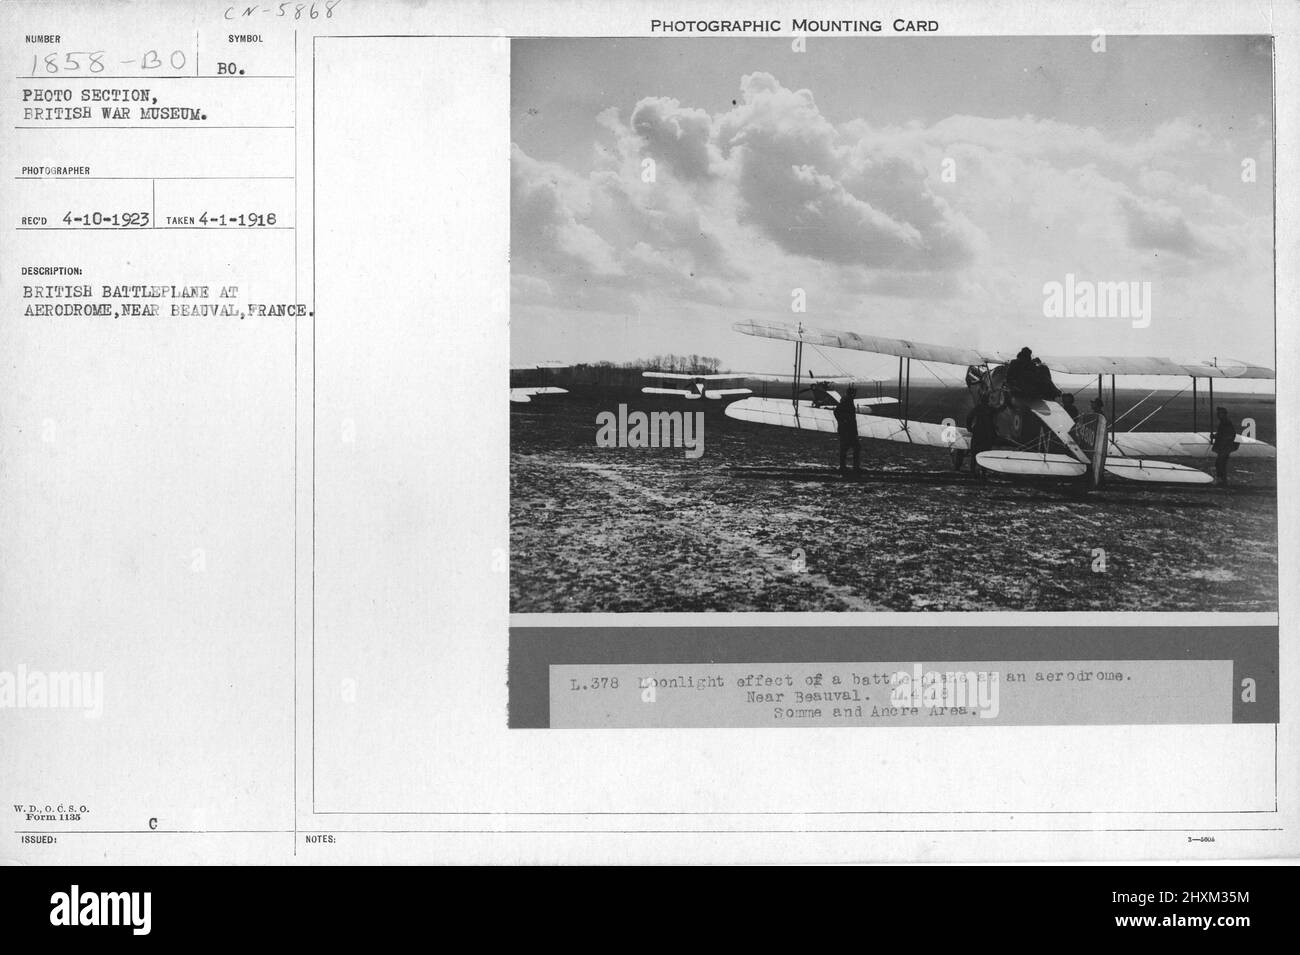 British battleplane at Aerodrome, near Beauval, France. Collection of World War I Photographs, 1914-1918 that depict the military activities of British and other nation's armed forces and personnel during World War I. Stock Photo